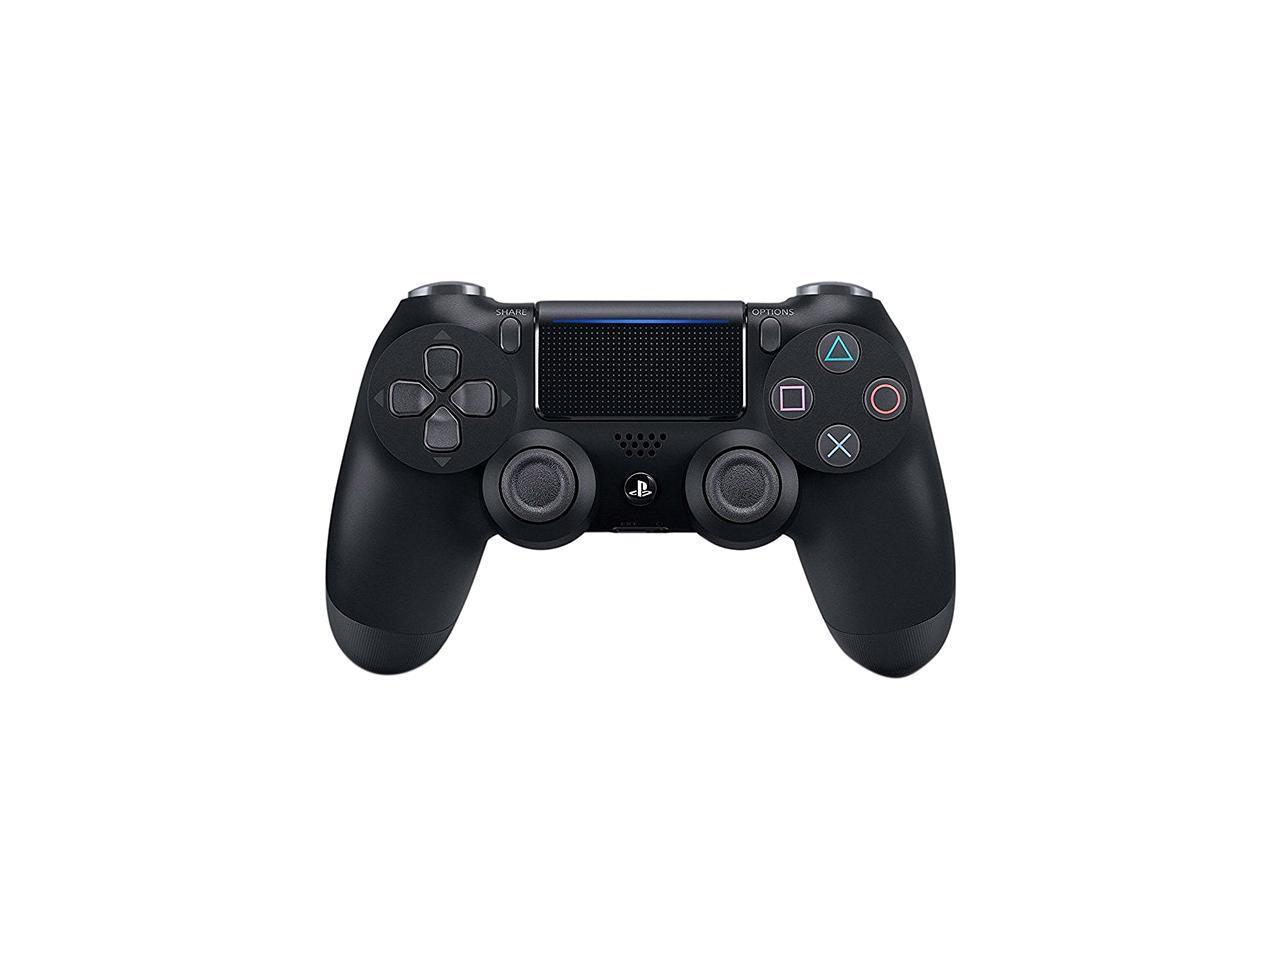 OEM DualShock 4 Wireless Controller for Sony PlayStation 4 - Jet Black (CUH-ZCT2)